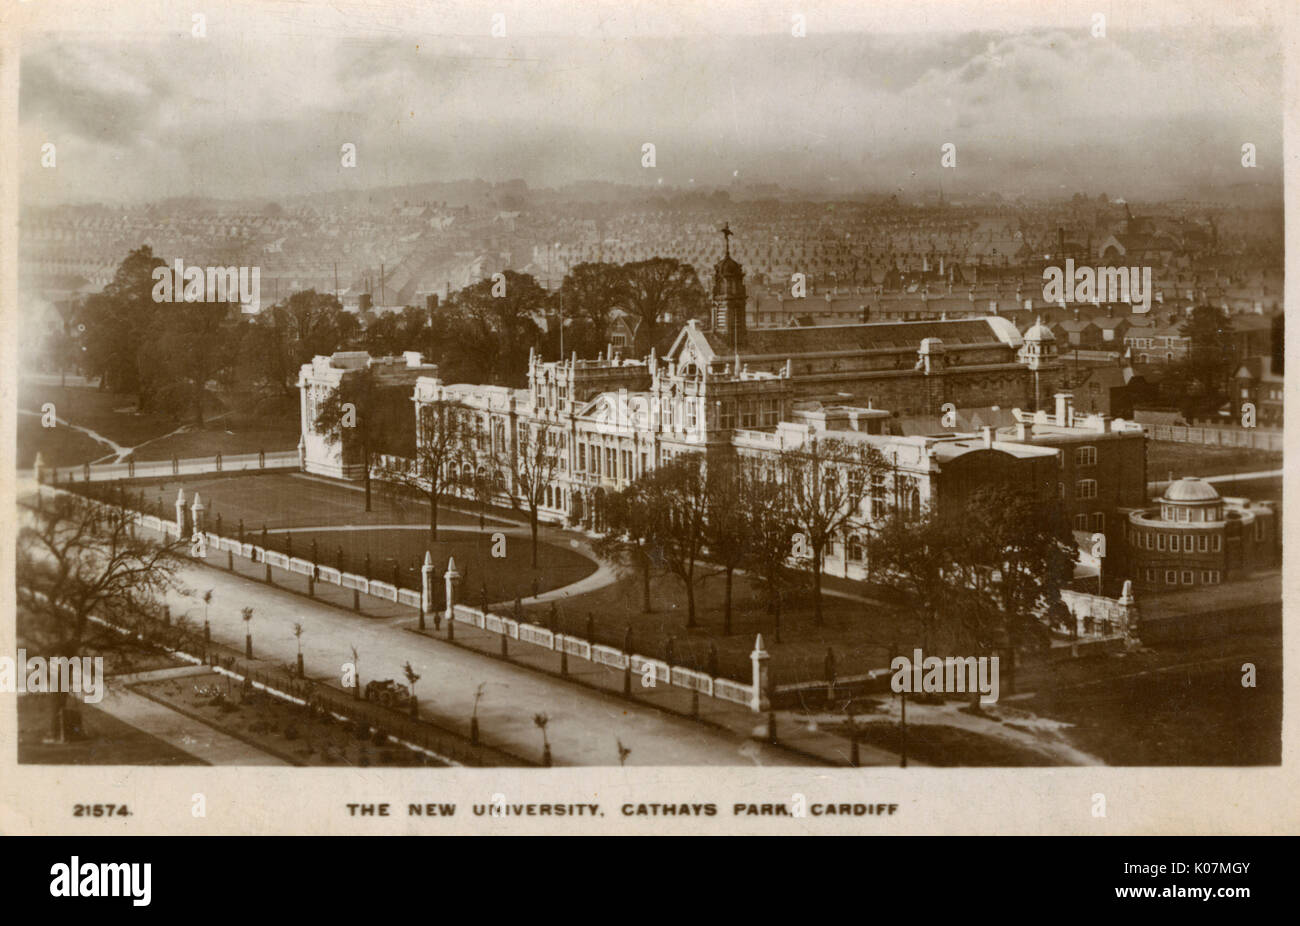 The New University - Cathays Park, Cardiff, South Wales     Date: 1917 Stock Photo